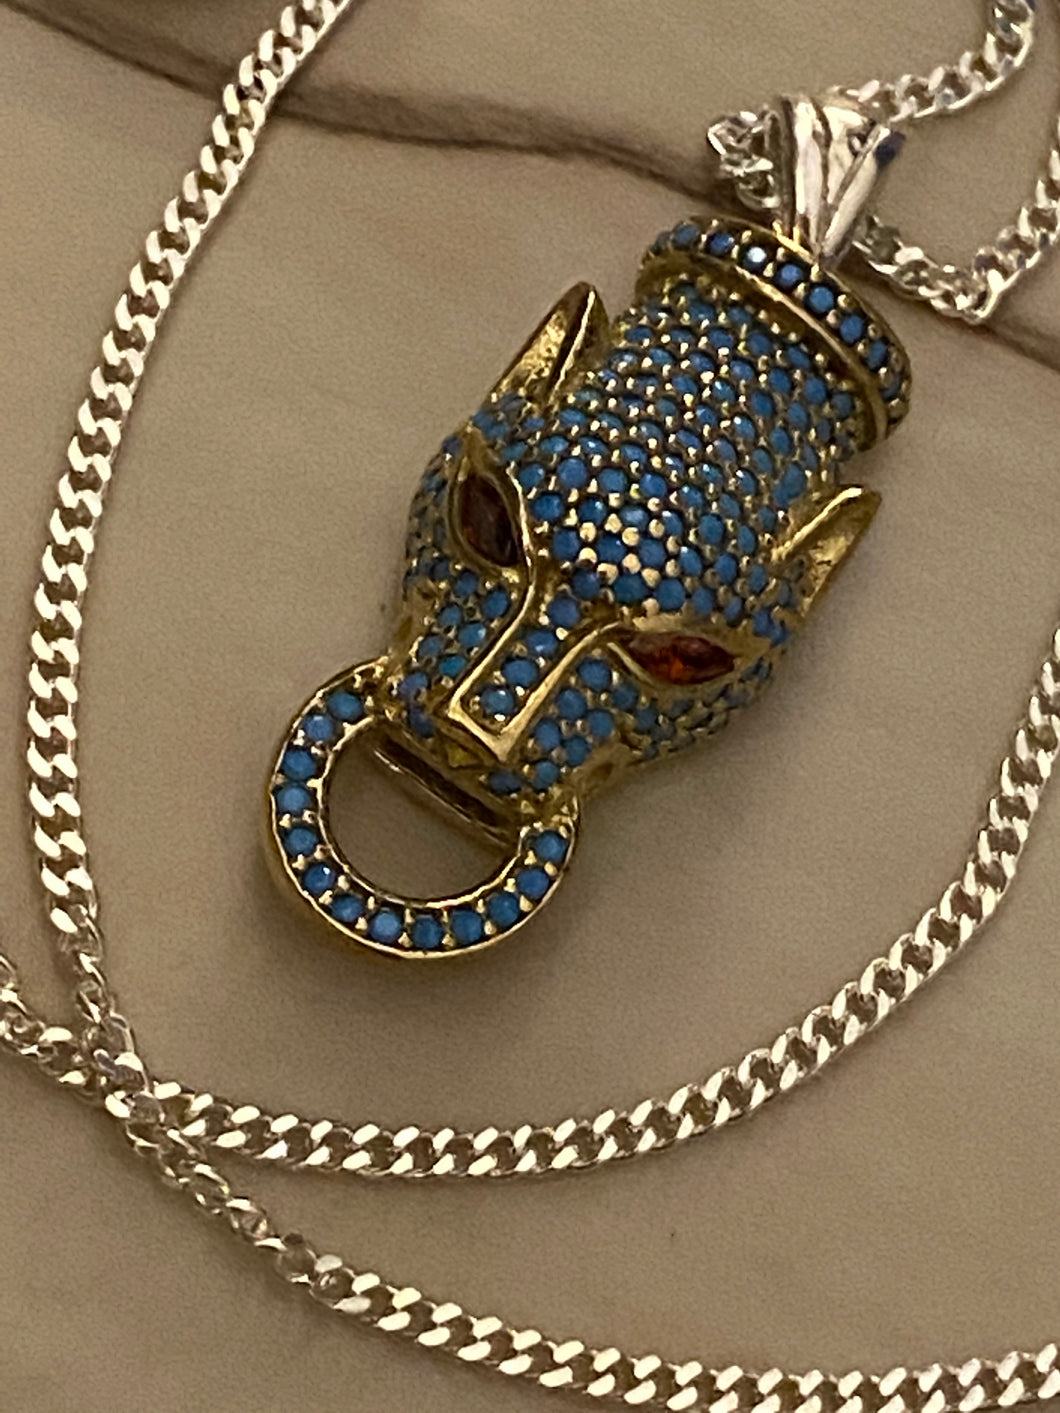 Pave Technique Turquoise Panther Pendant Ruby Eyes Gold & Sterling Silver